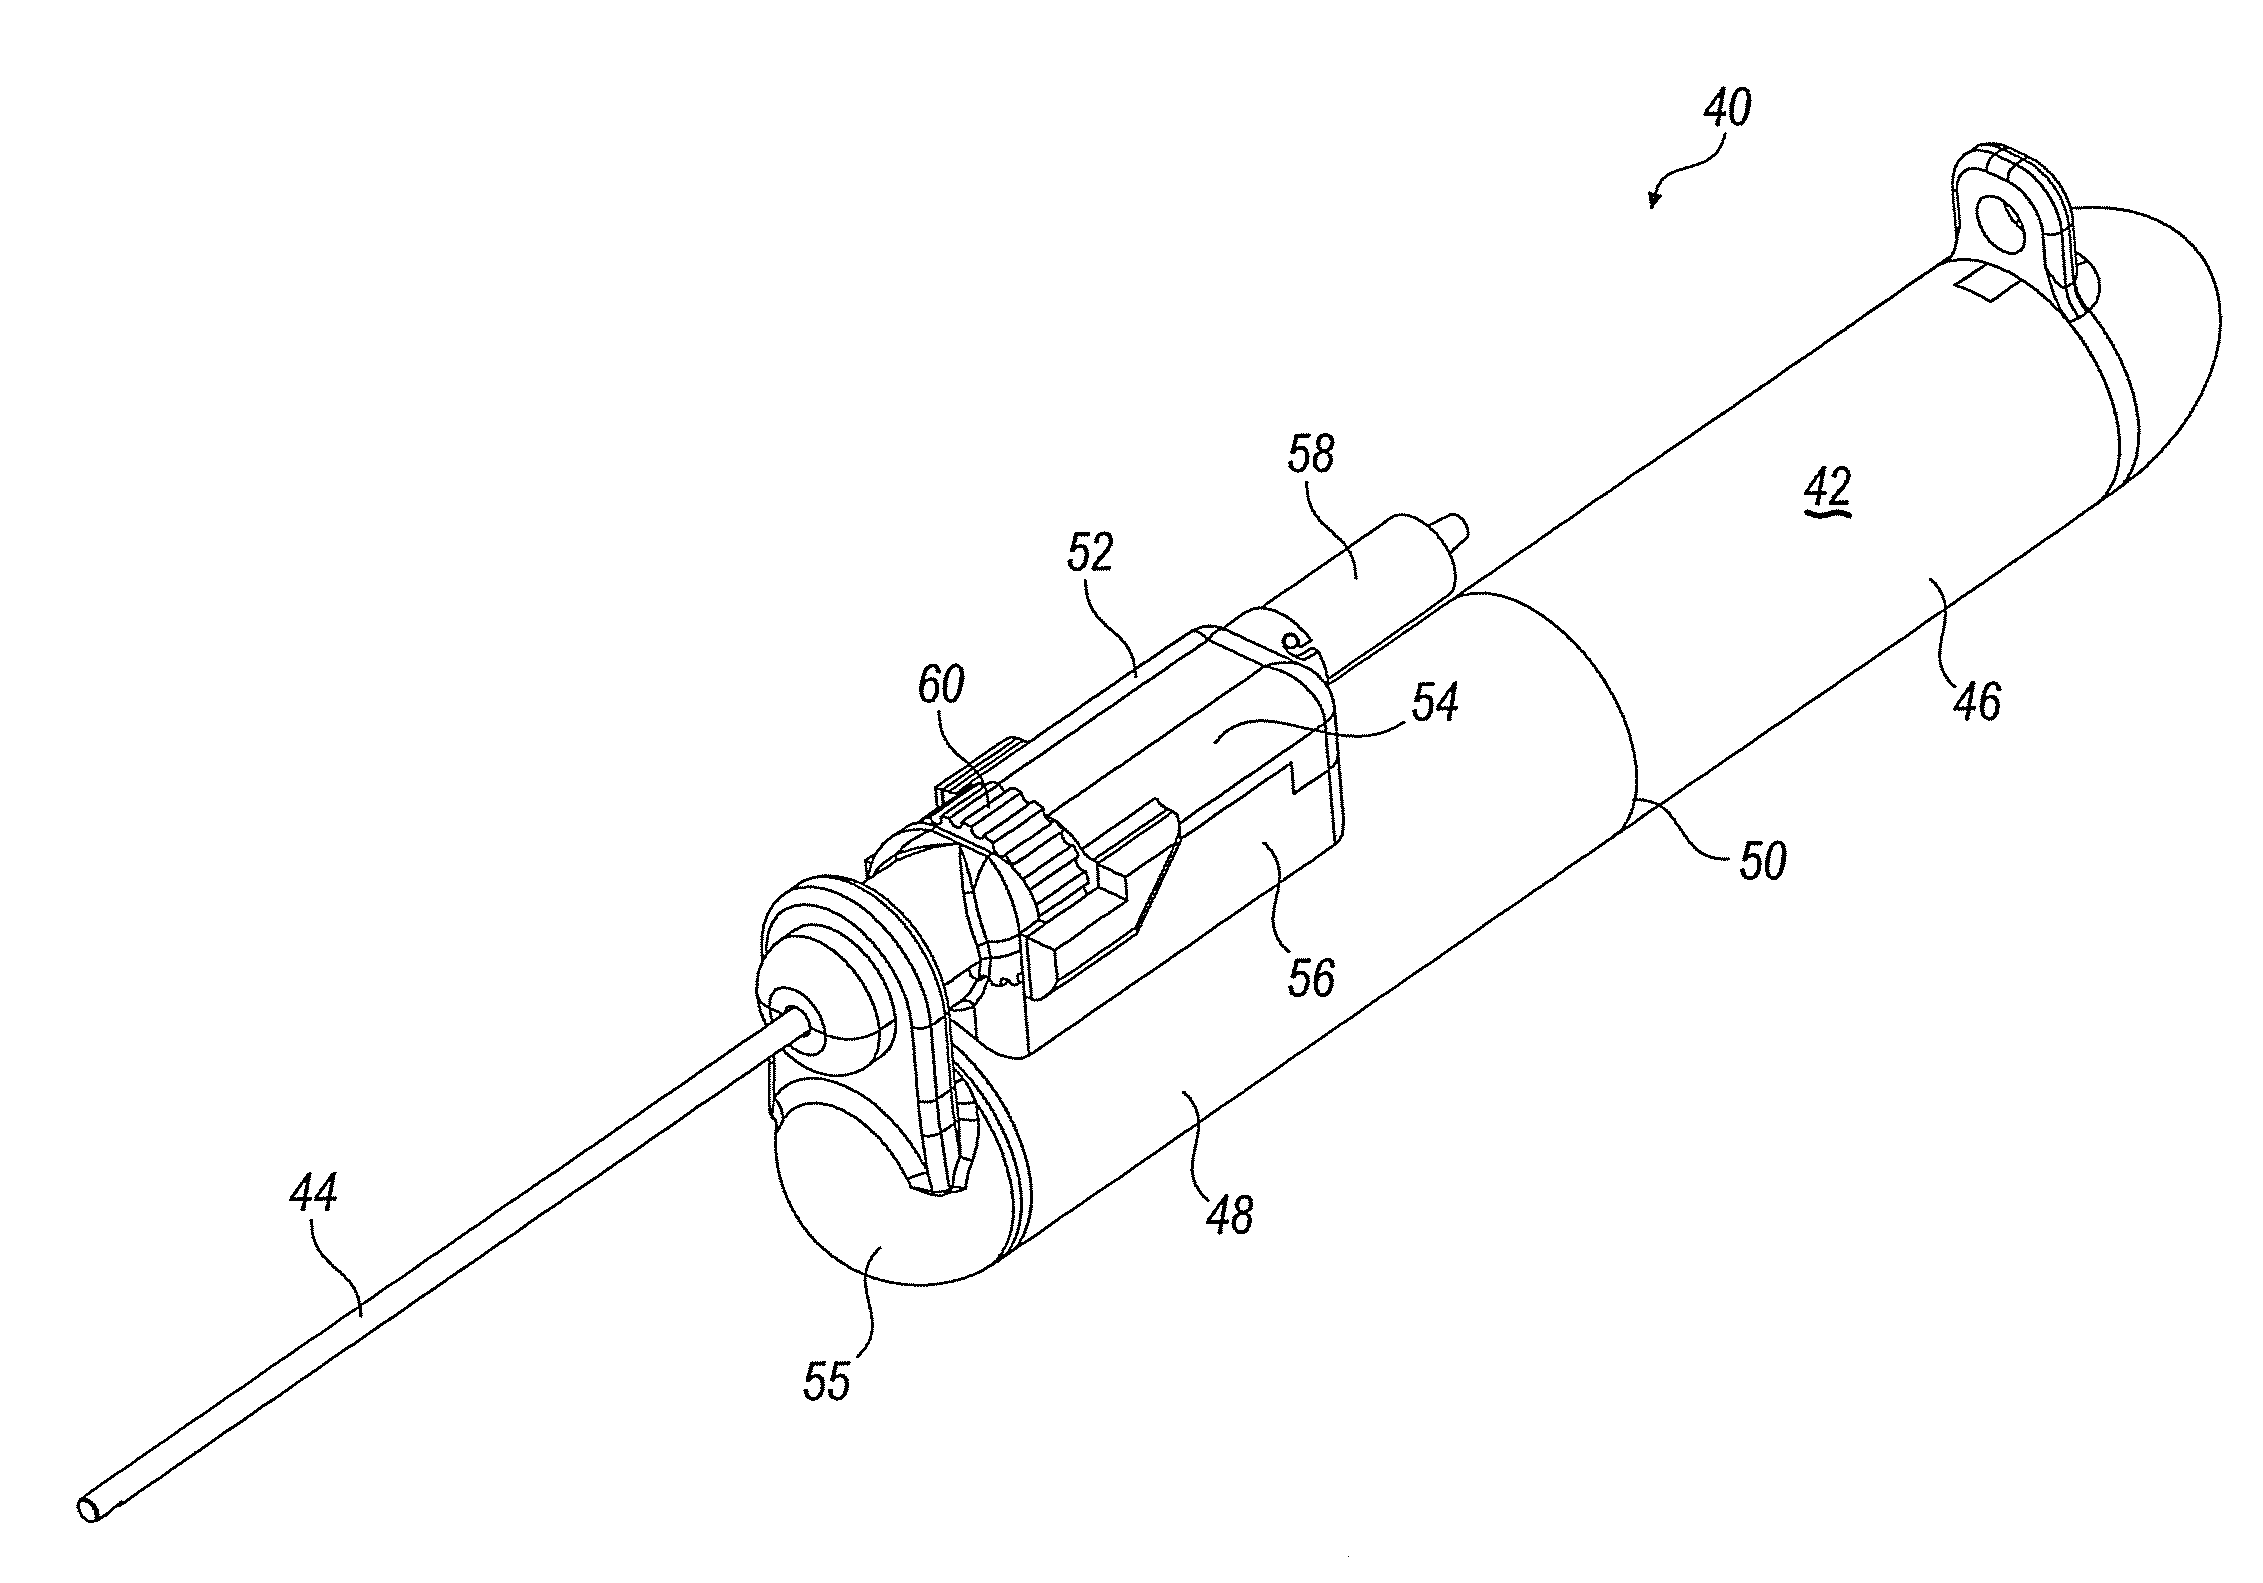 Positioning system for tissue removal device